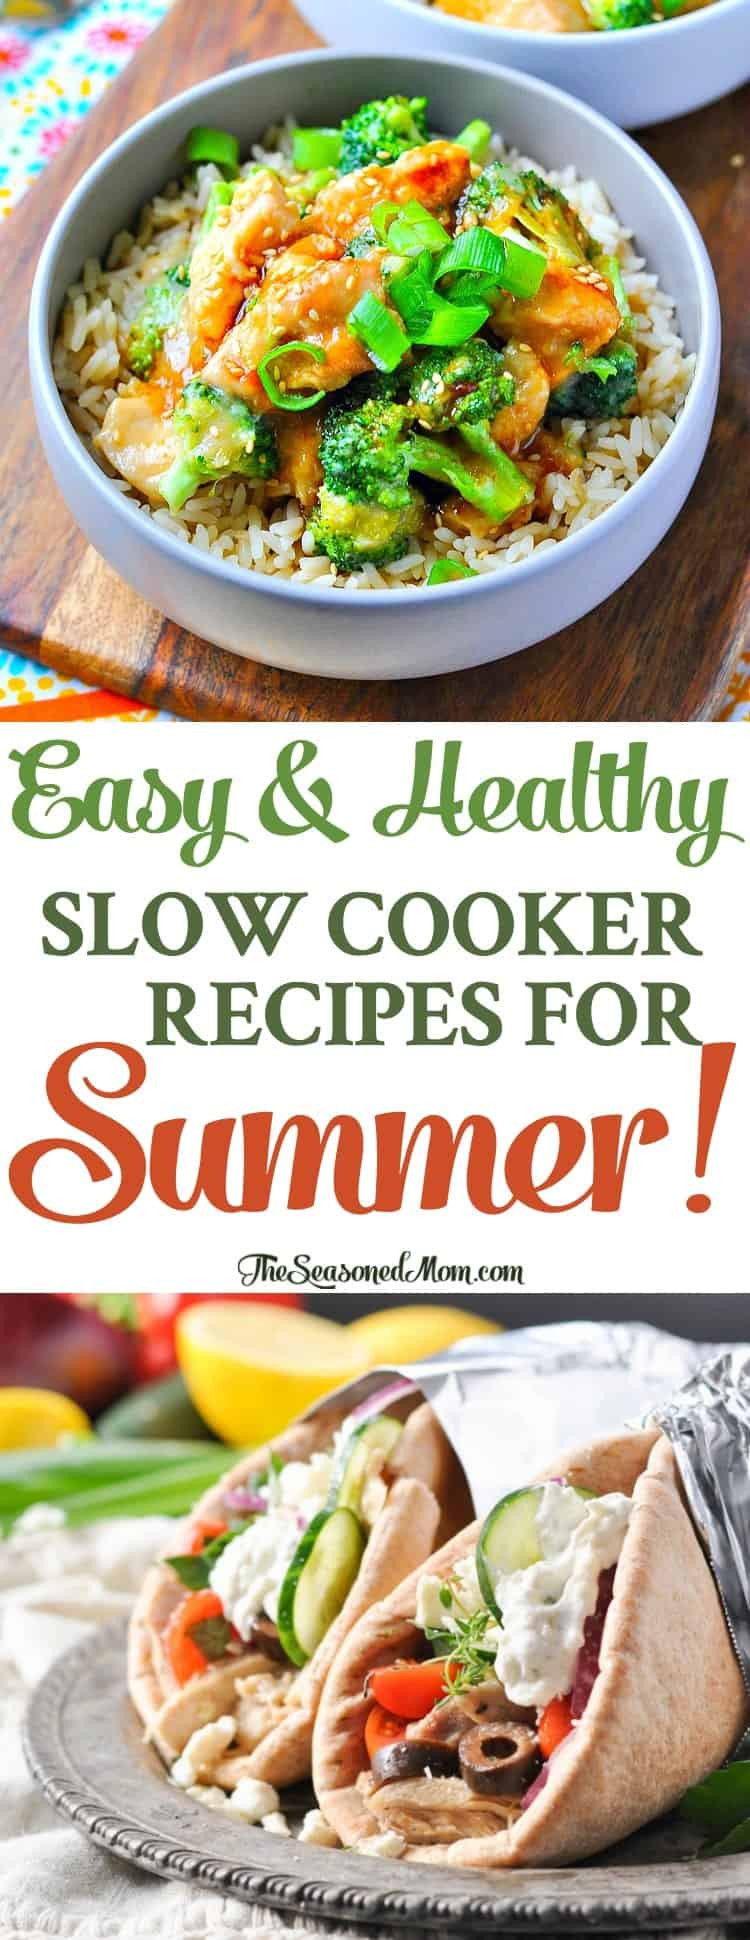 Healthy Slow Cooker Recipes
 Easy Healthy Slow Cooker Recipes for Summer The